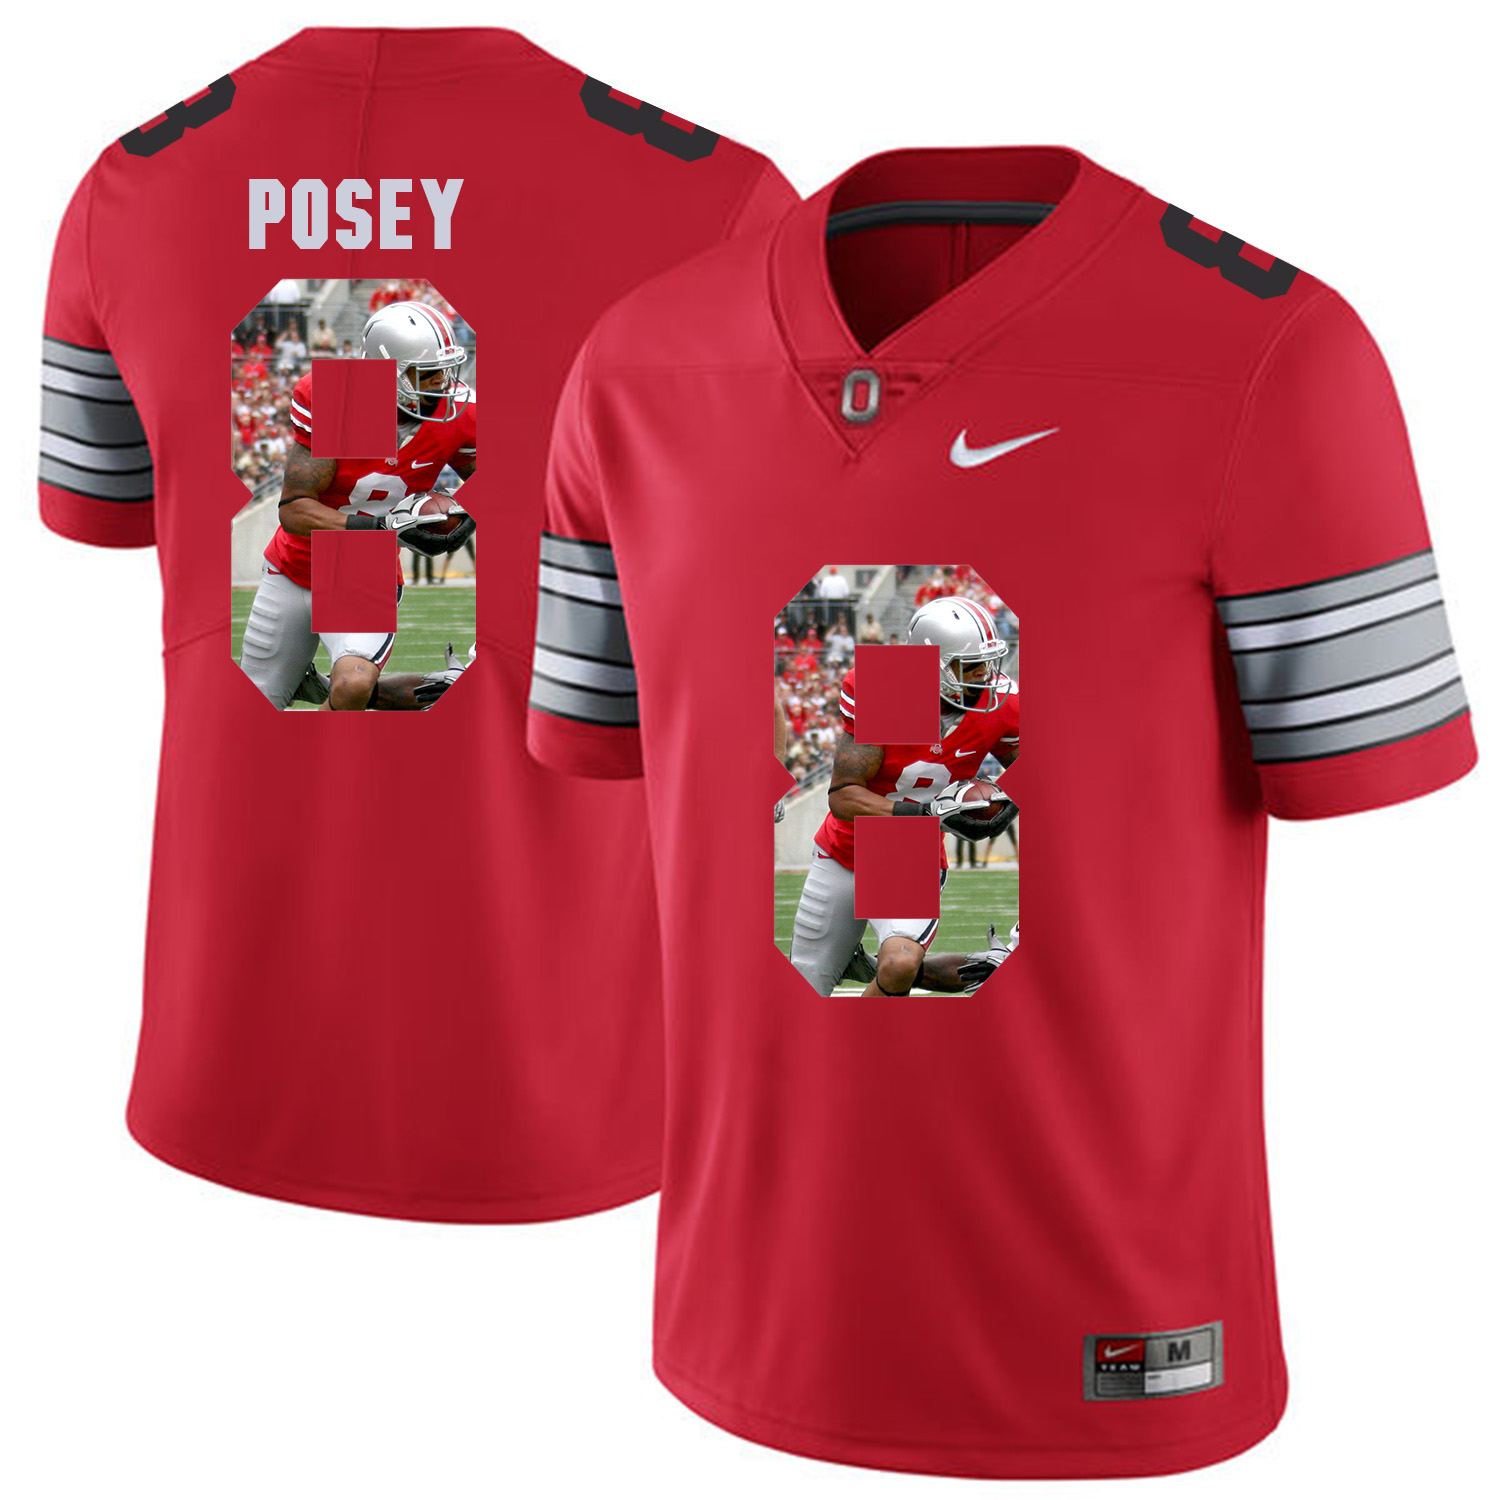 Men Ohio State 8 Posey Red Fashion Edition Customized NCAA Jerseys